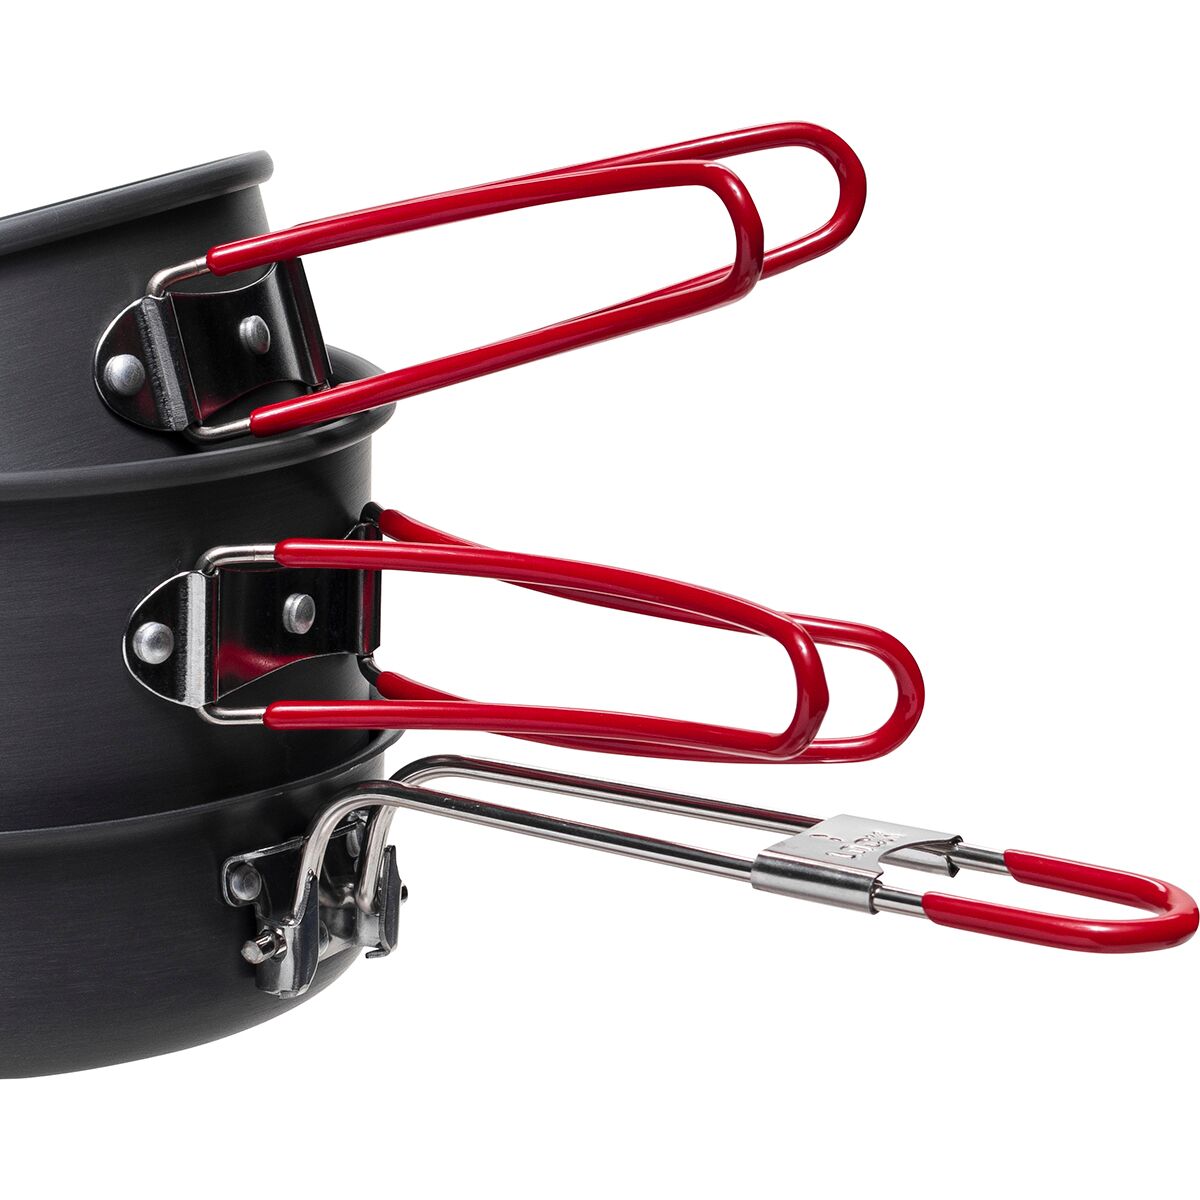 Stoic Hard Anodized Camping Cook Set - Hike & Camp